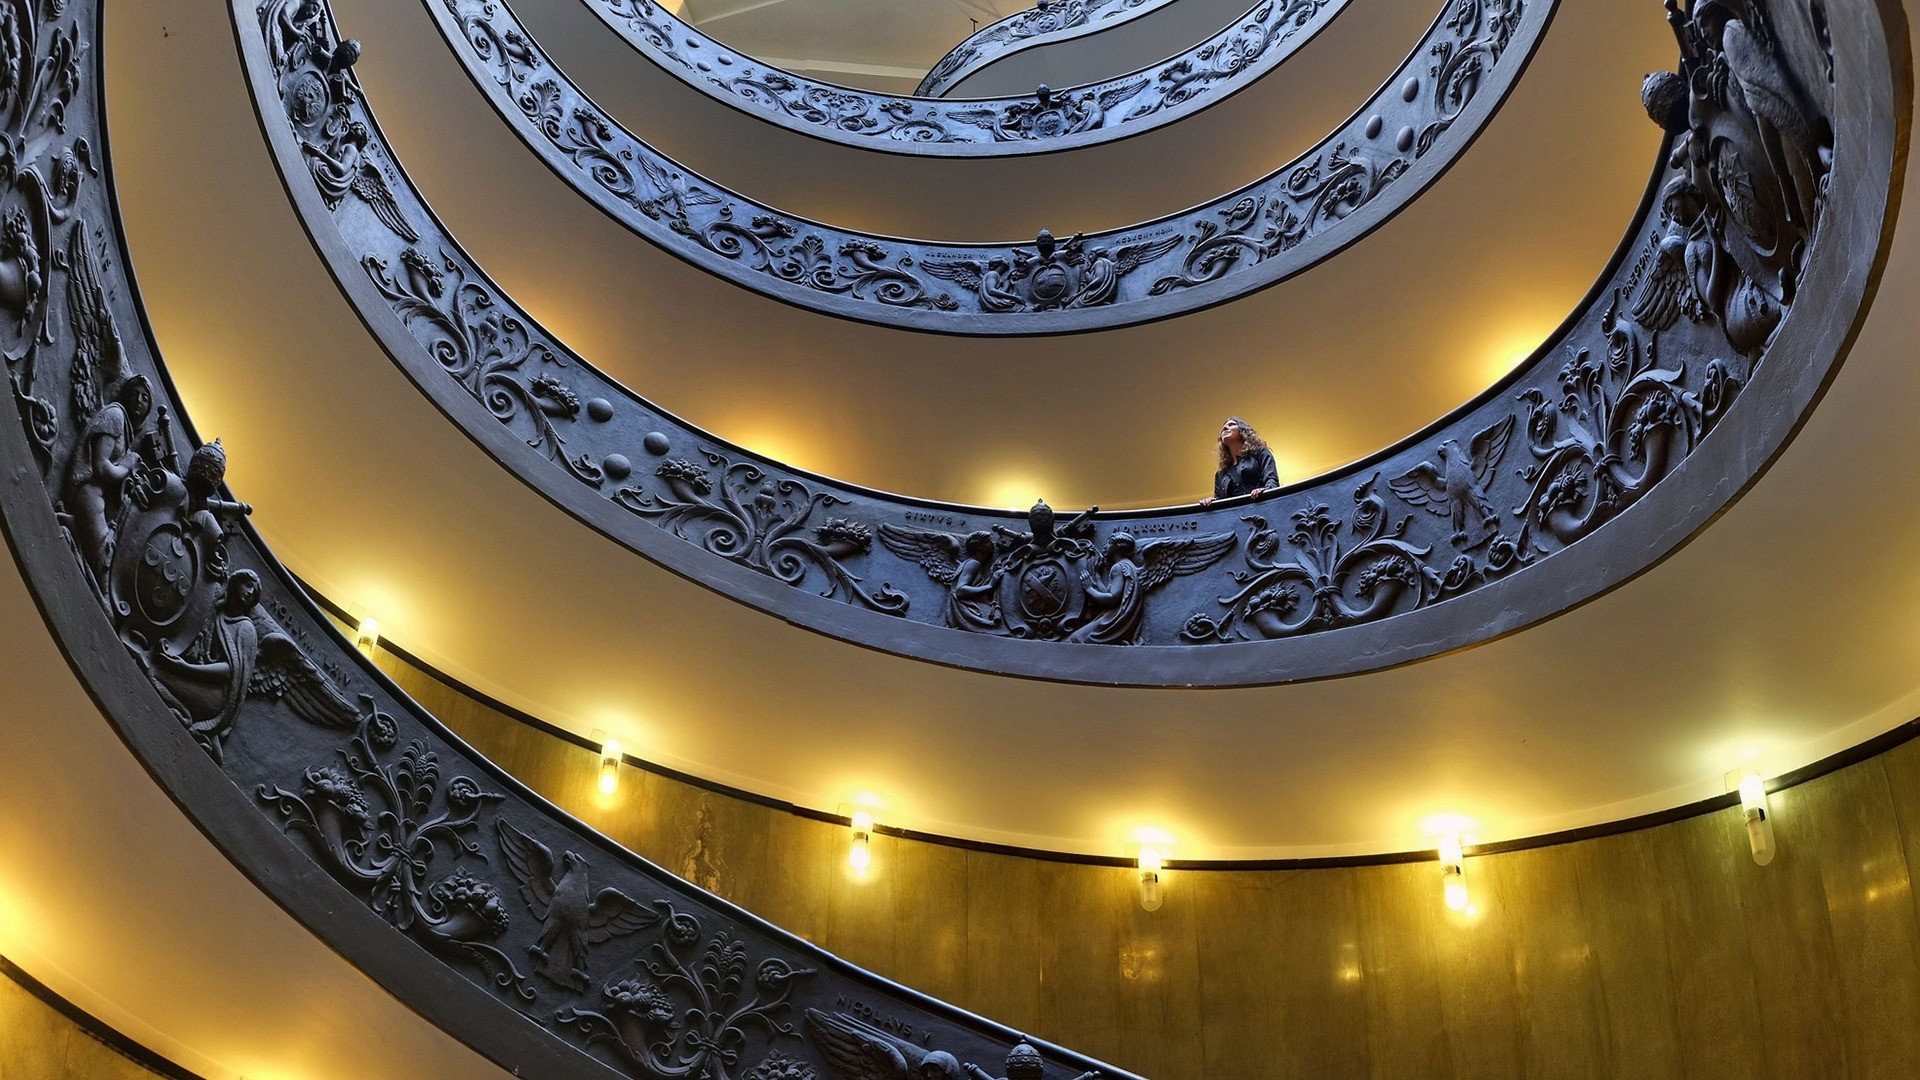 General 1920x1080 architecture indoors stairs Vatican City museum women lights decorations angel coat of arms spiral Rome Italy